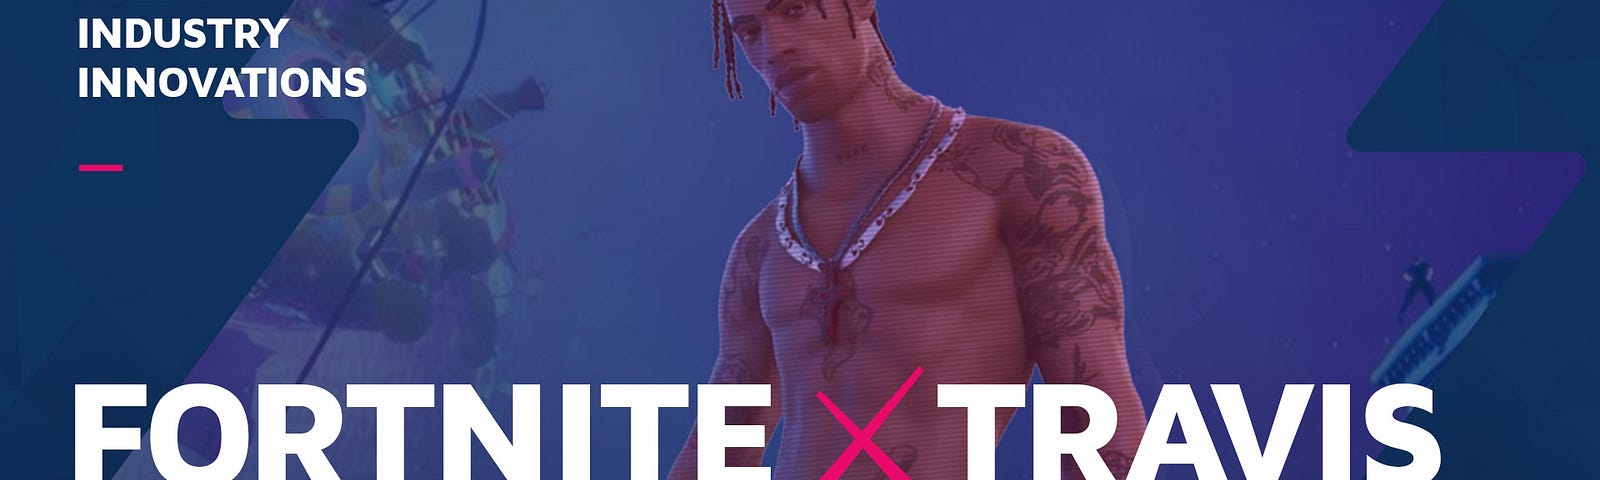 Fortnite partnership with Travis Scott on a virtual concert experience called “Astronomical”